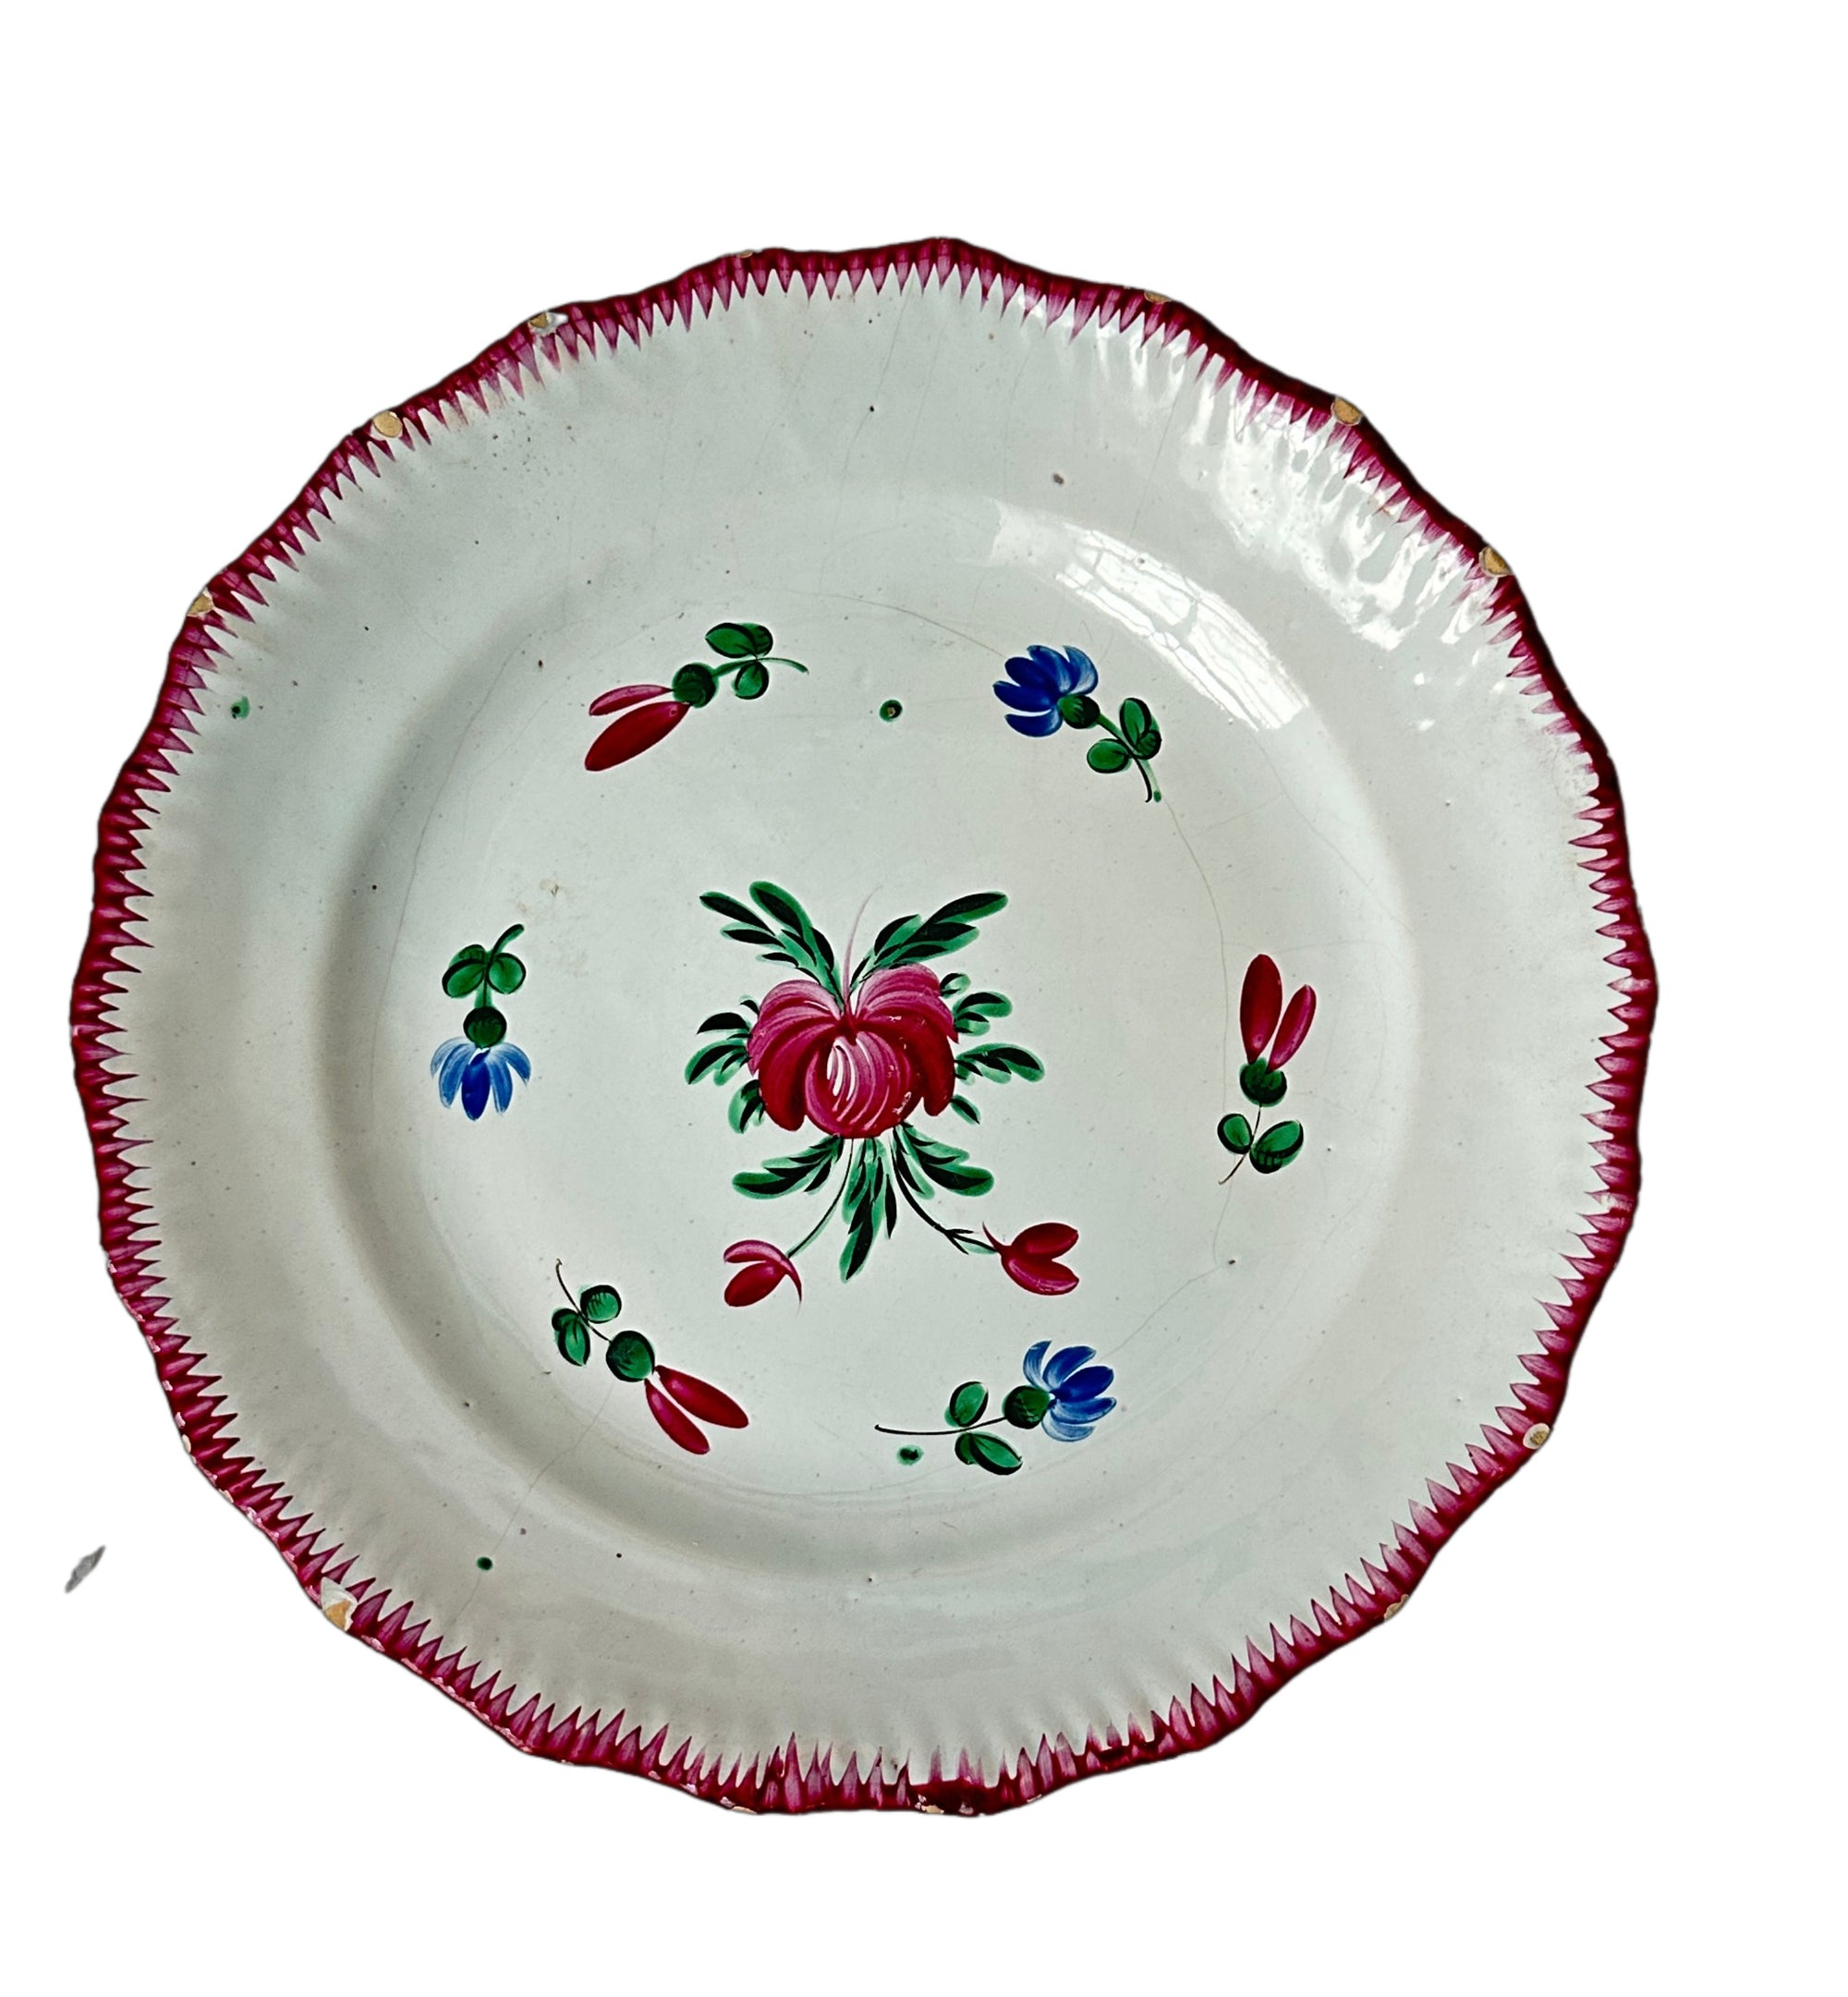 Antique French Strasbourg Plate